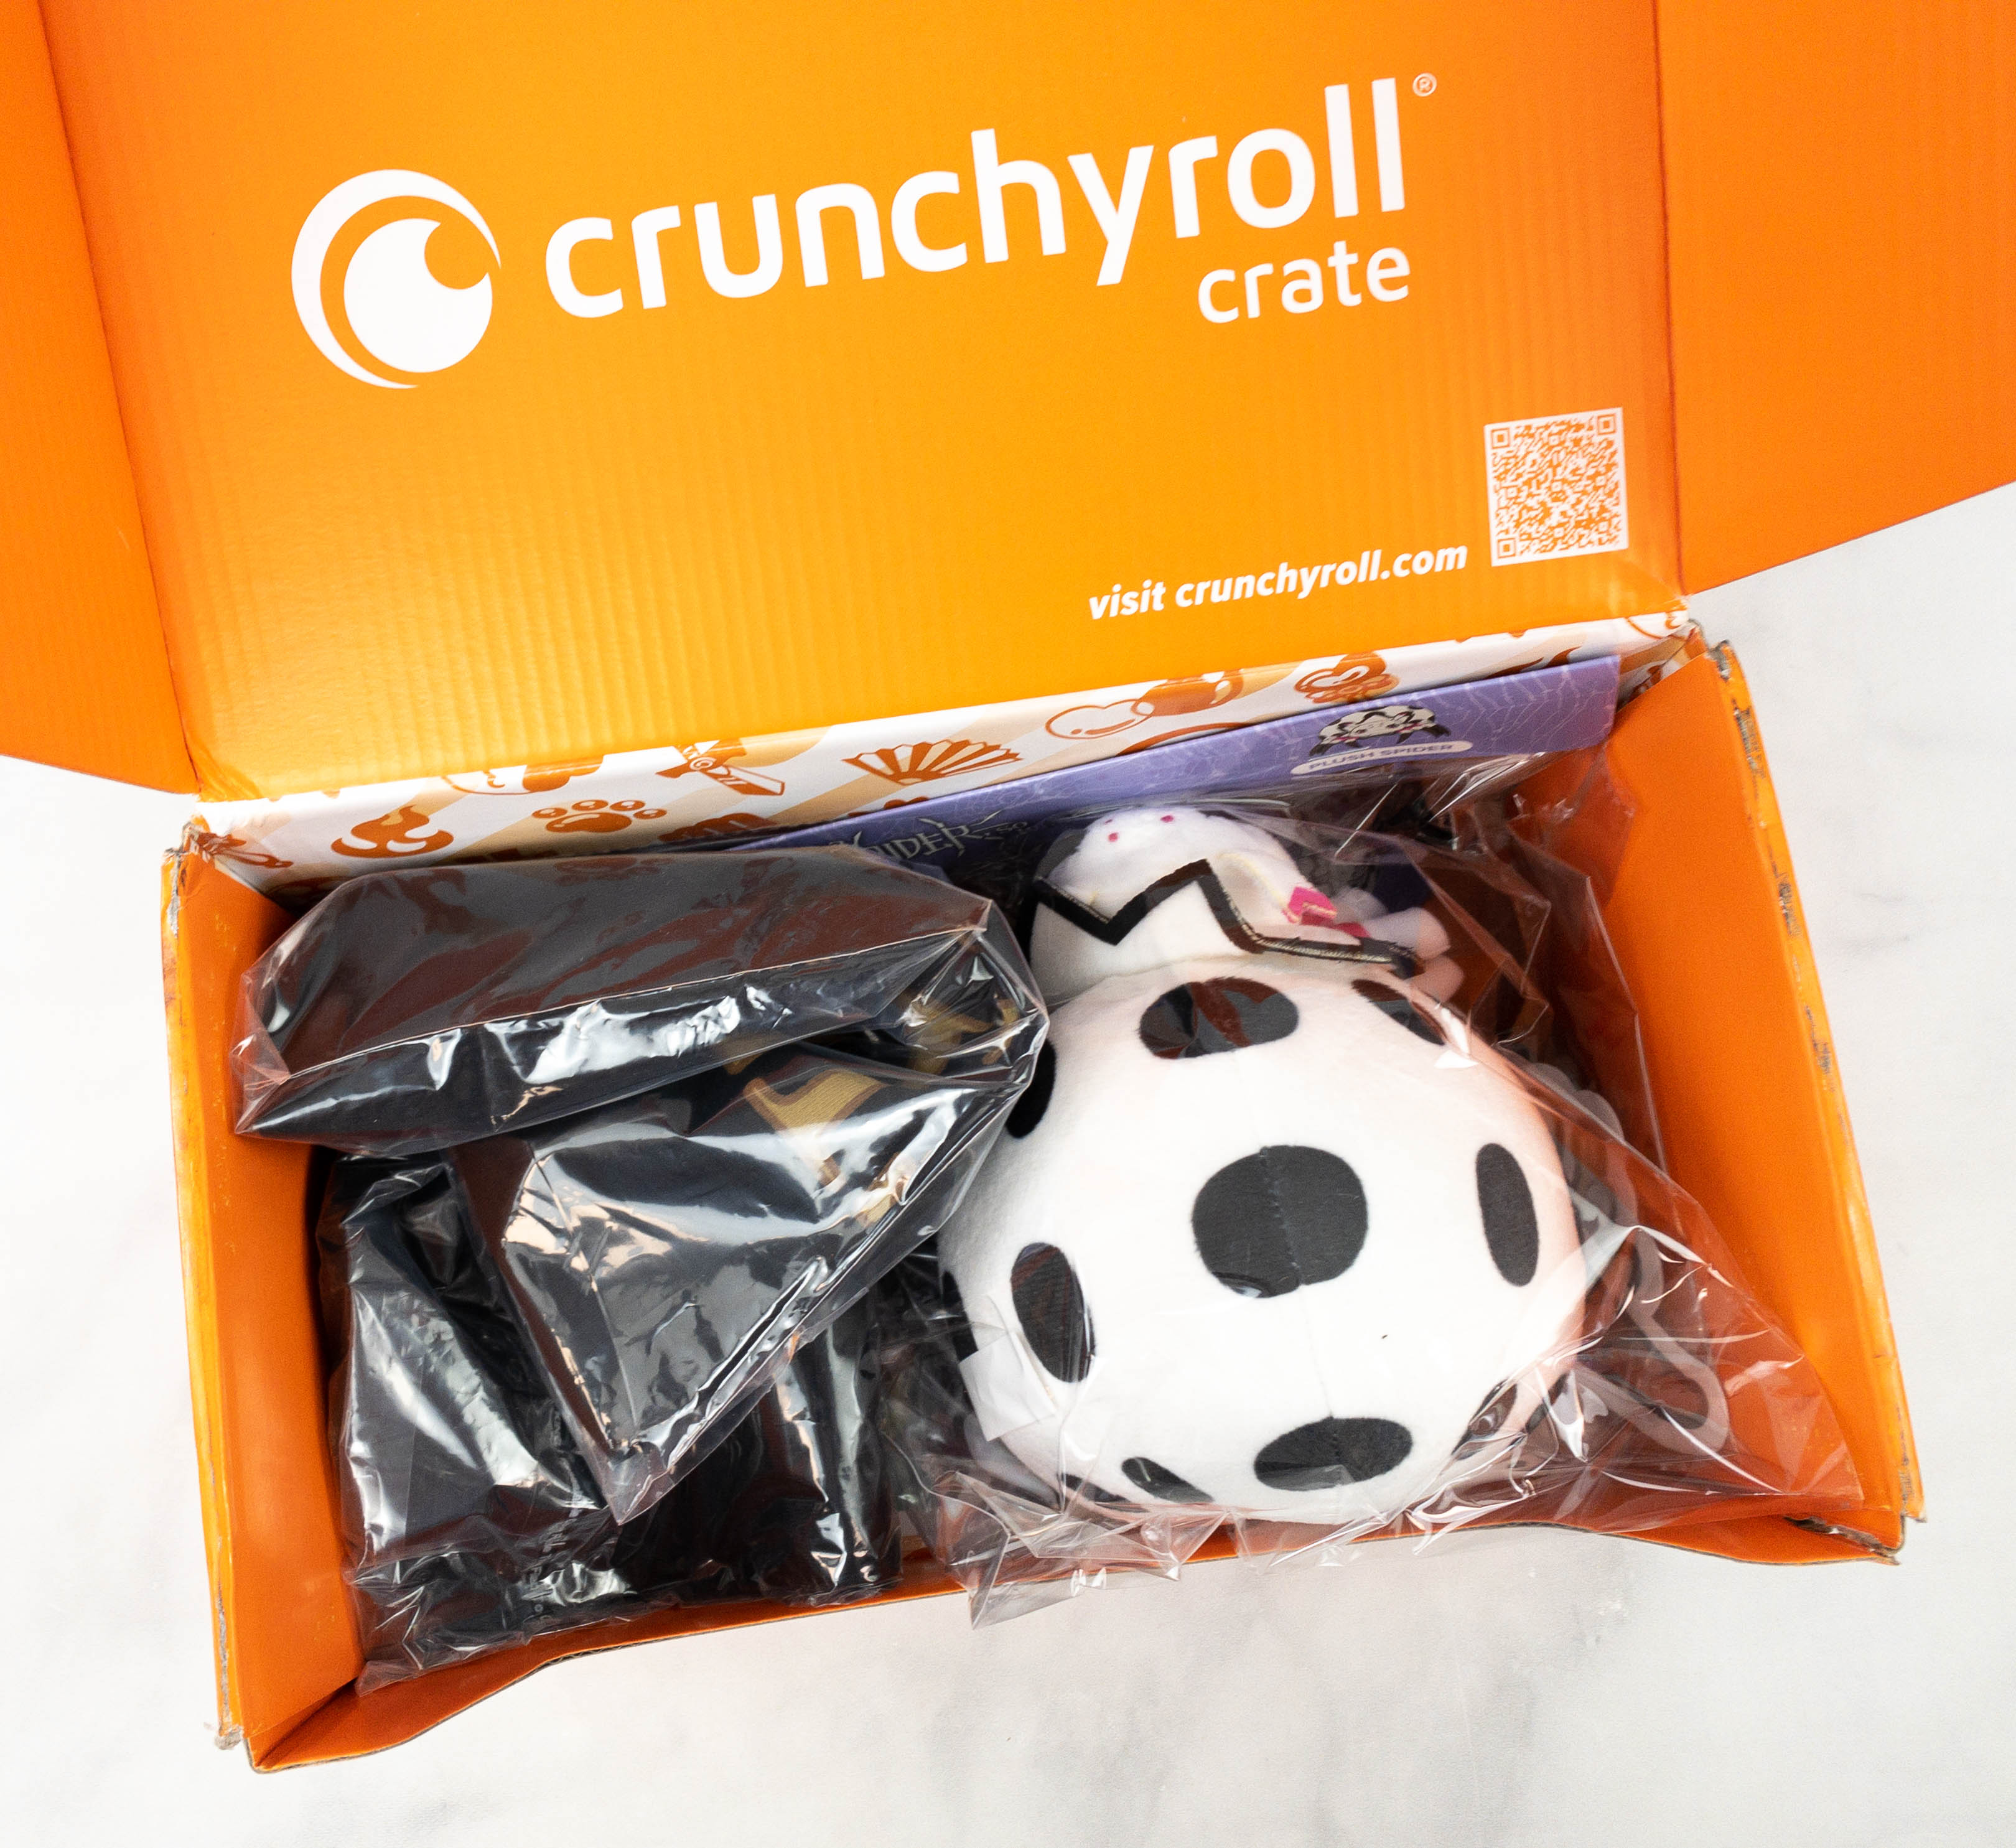 Crunchyroll Crate "FANTASY WORLD" February 2021 Subscription Box Review